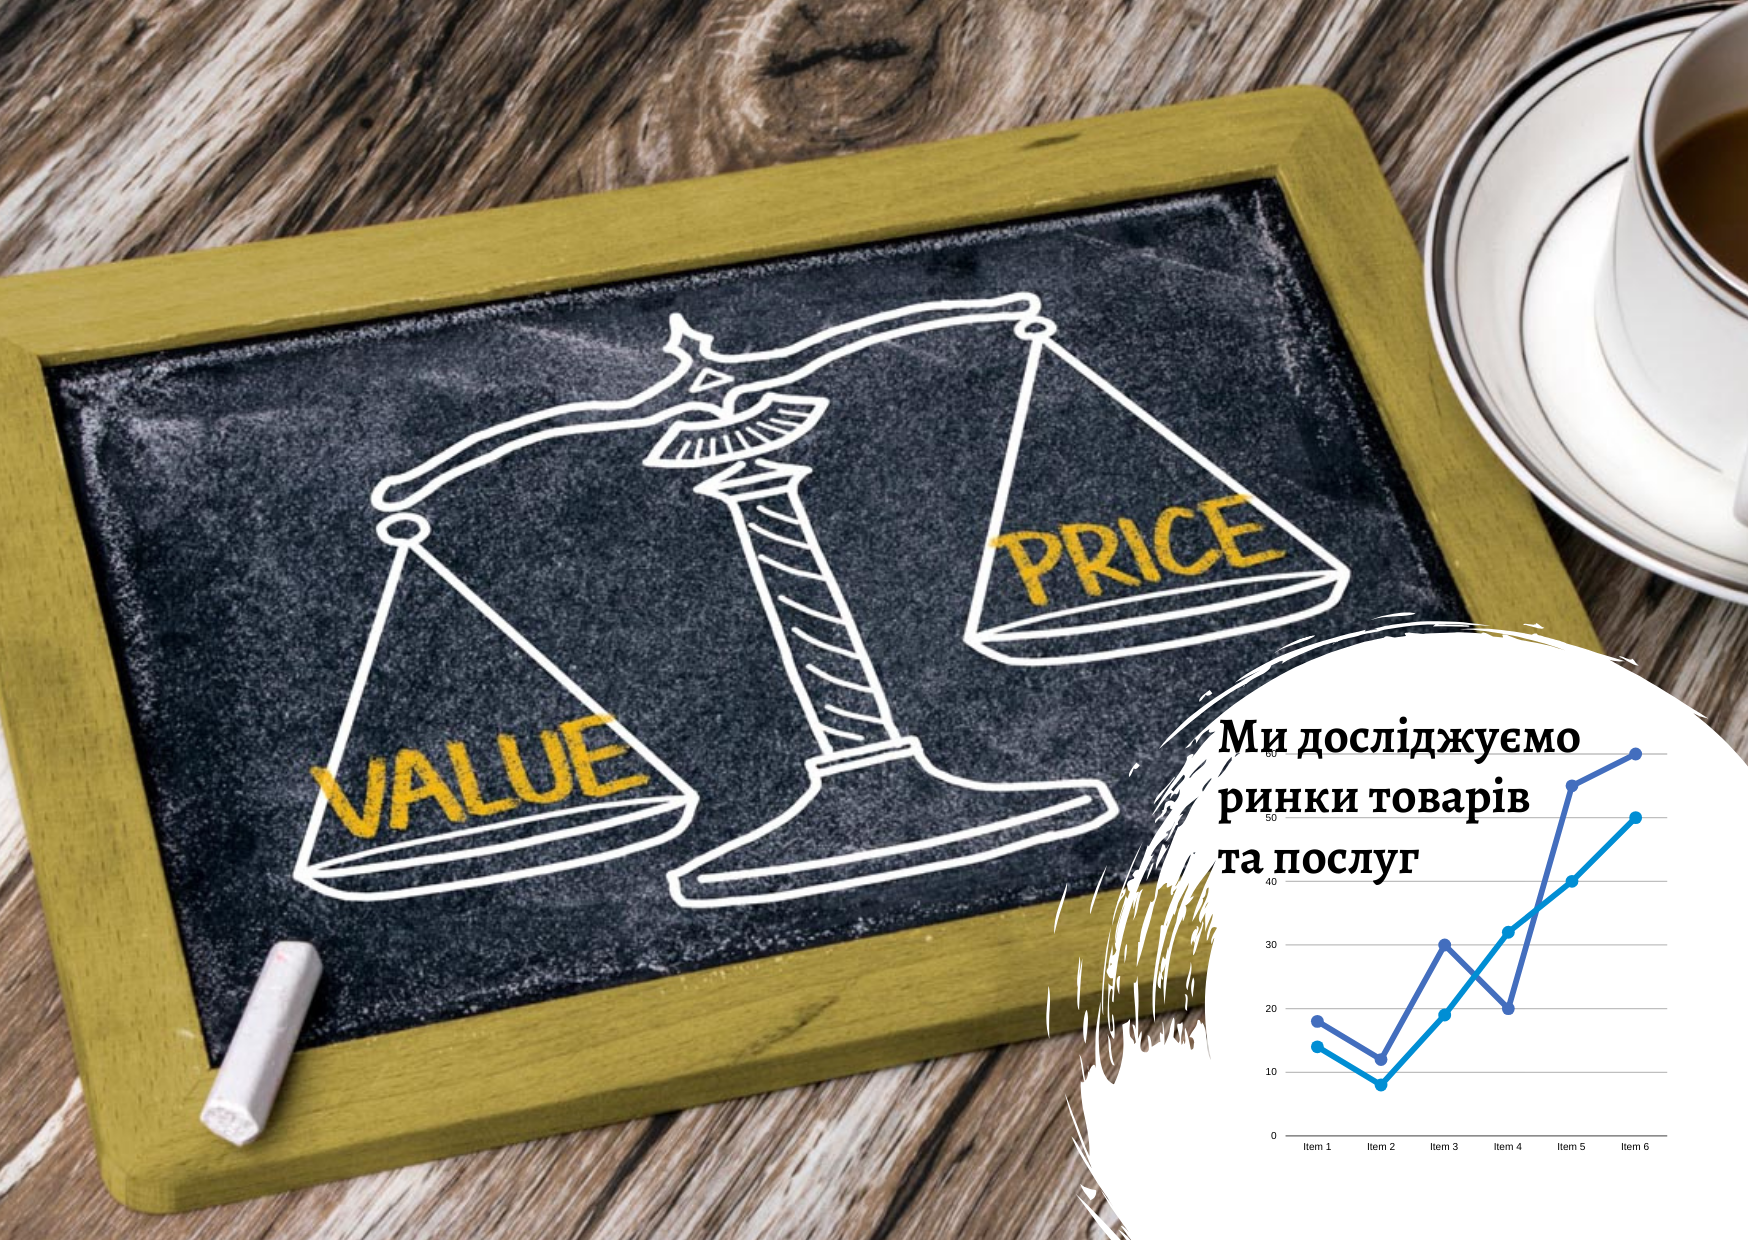 Market analysis: price is much lower than value